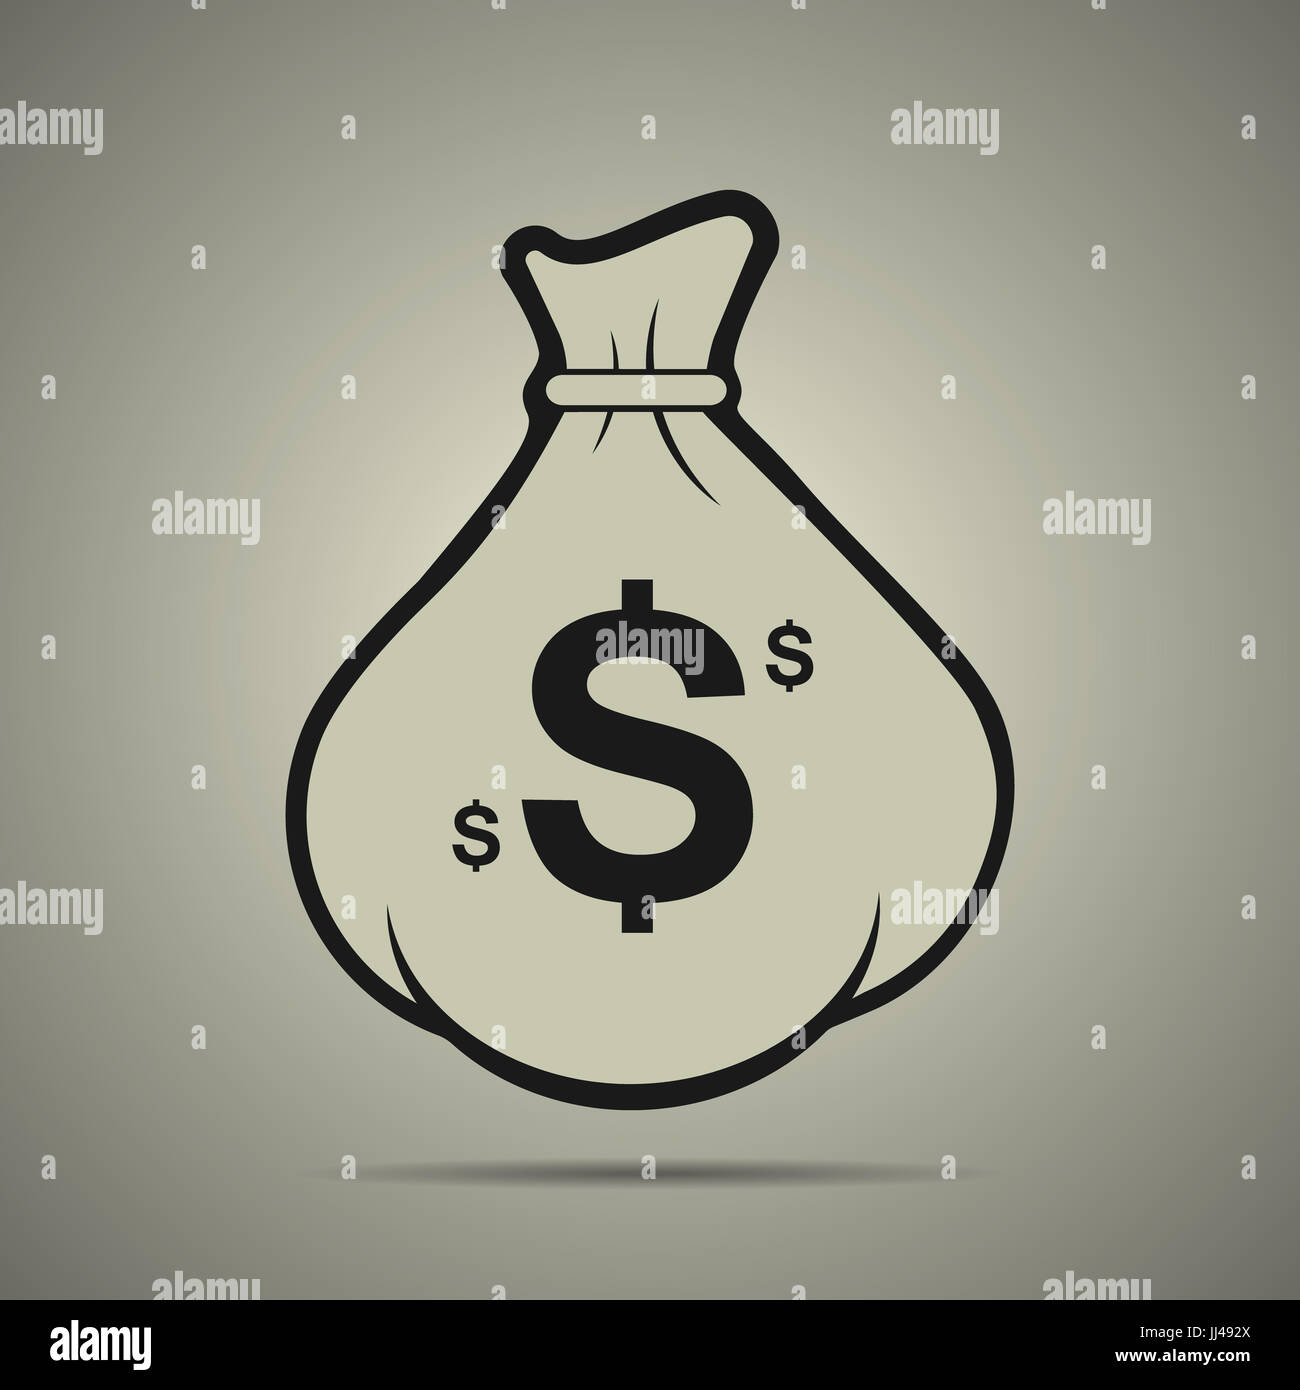 White money bag icon in flat style, black and white colors Stock Photo